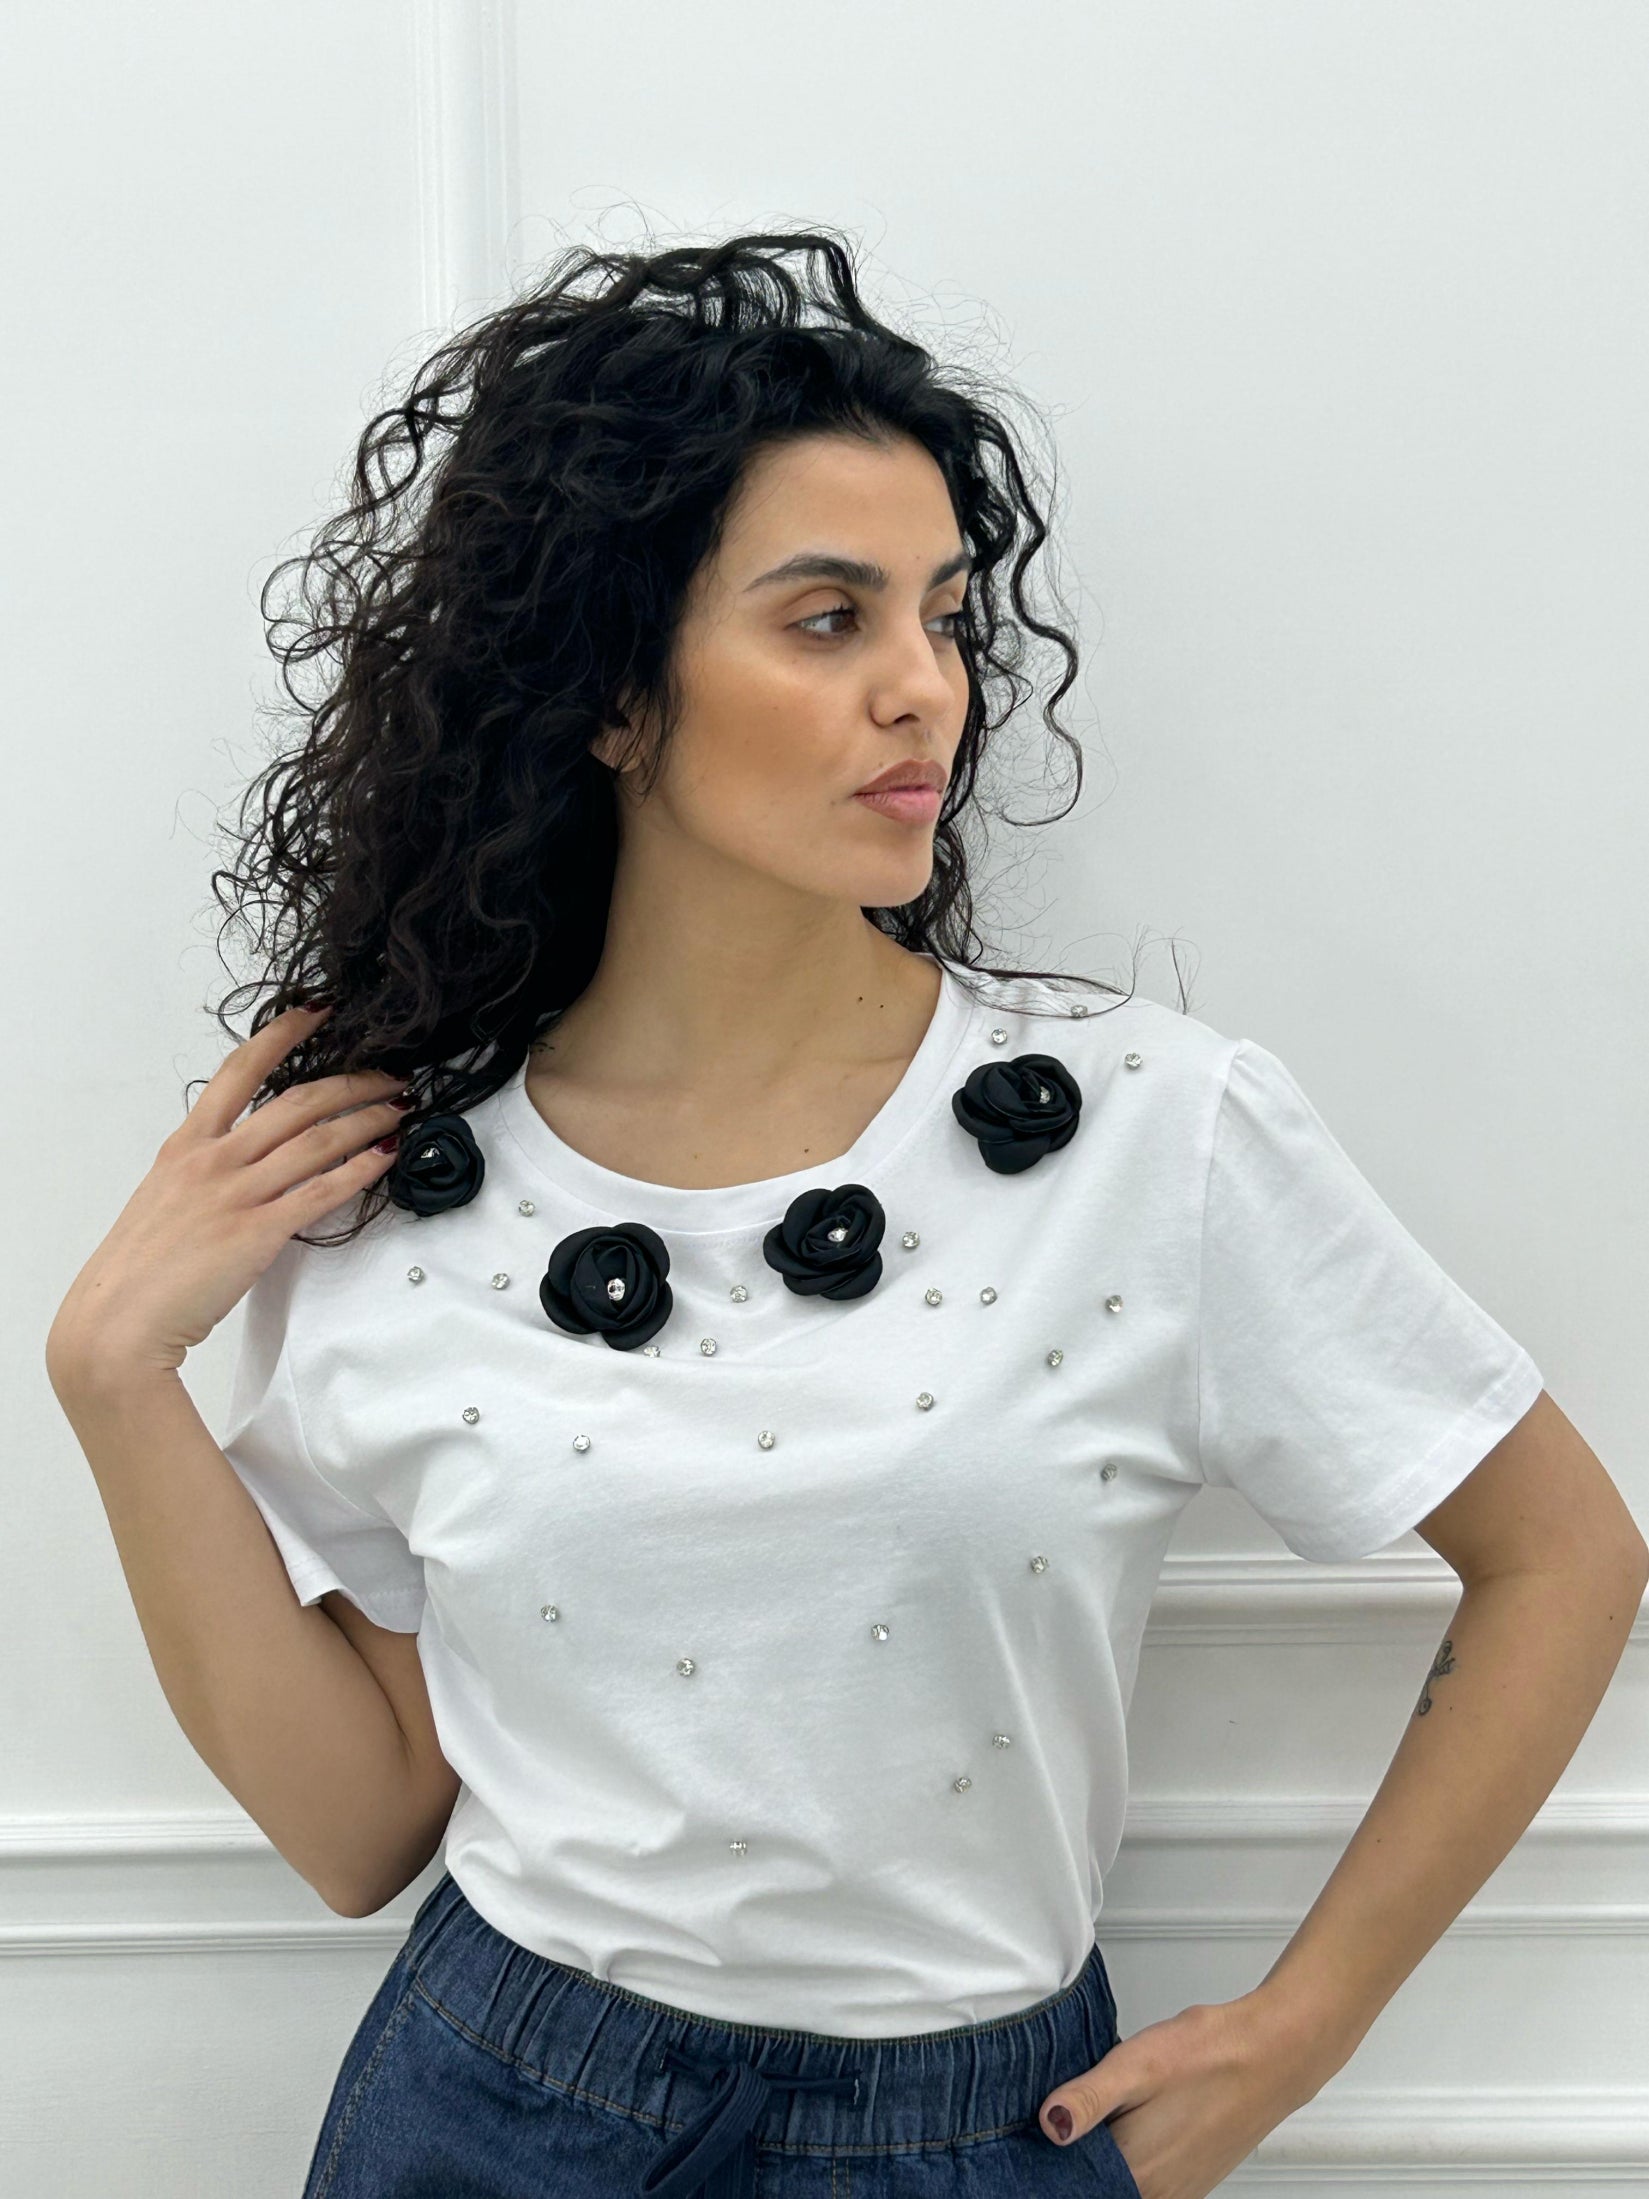 T-SHIRT ROSE E STRASS NEW COLLECTION